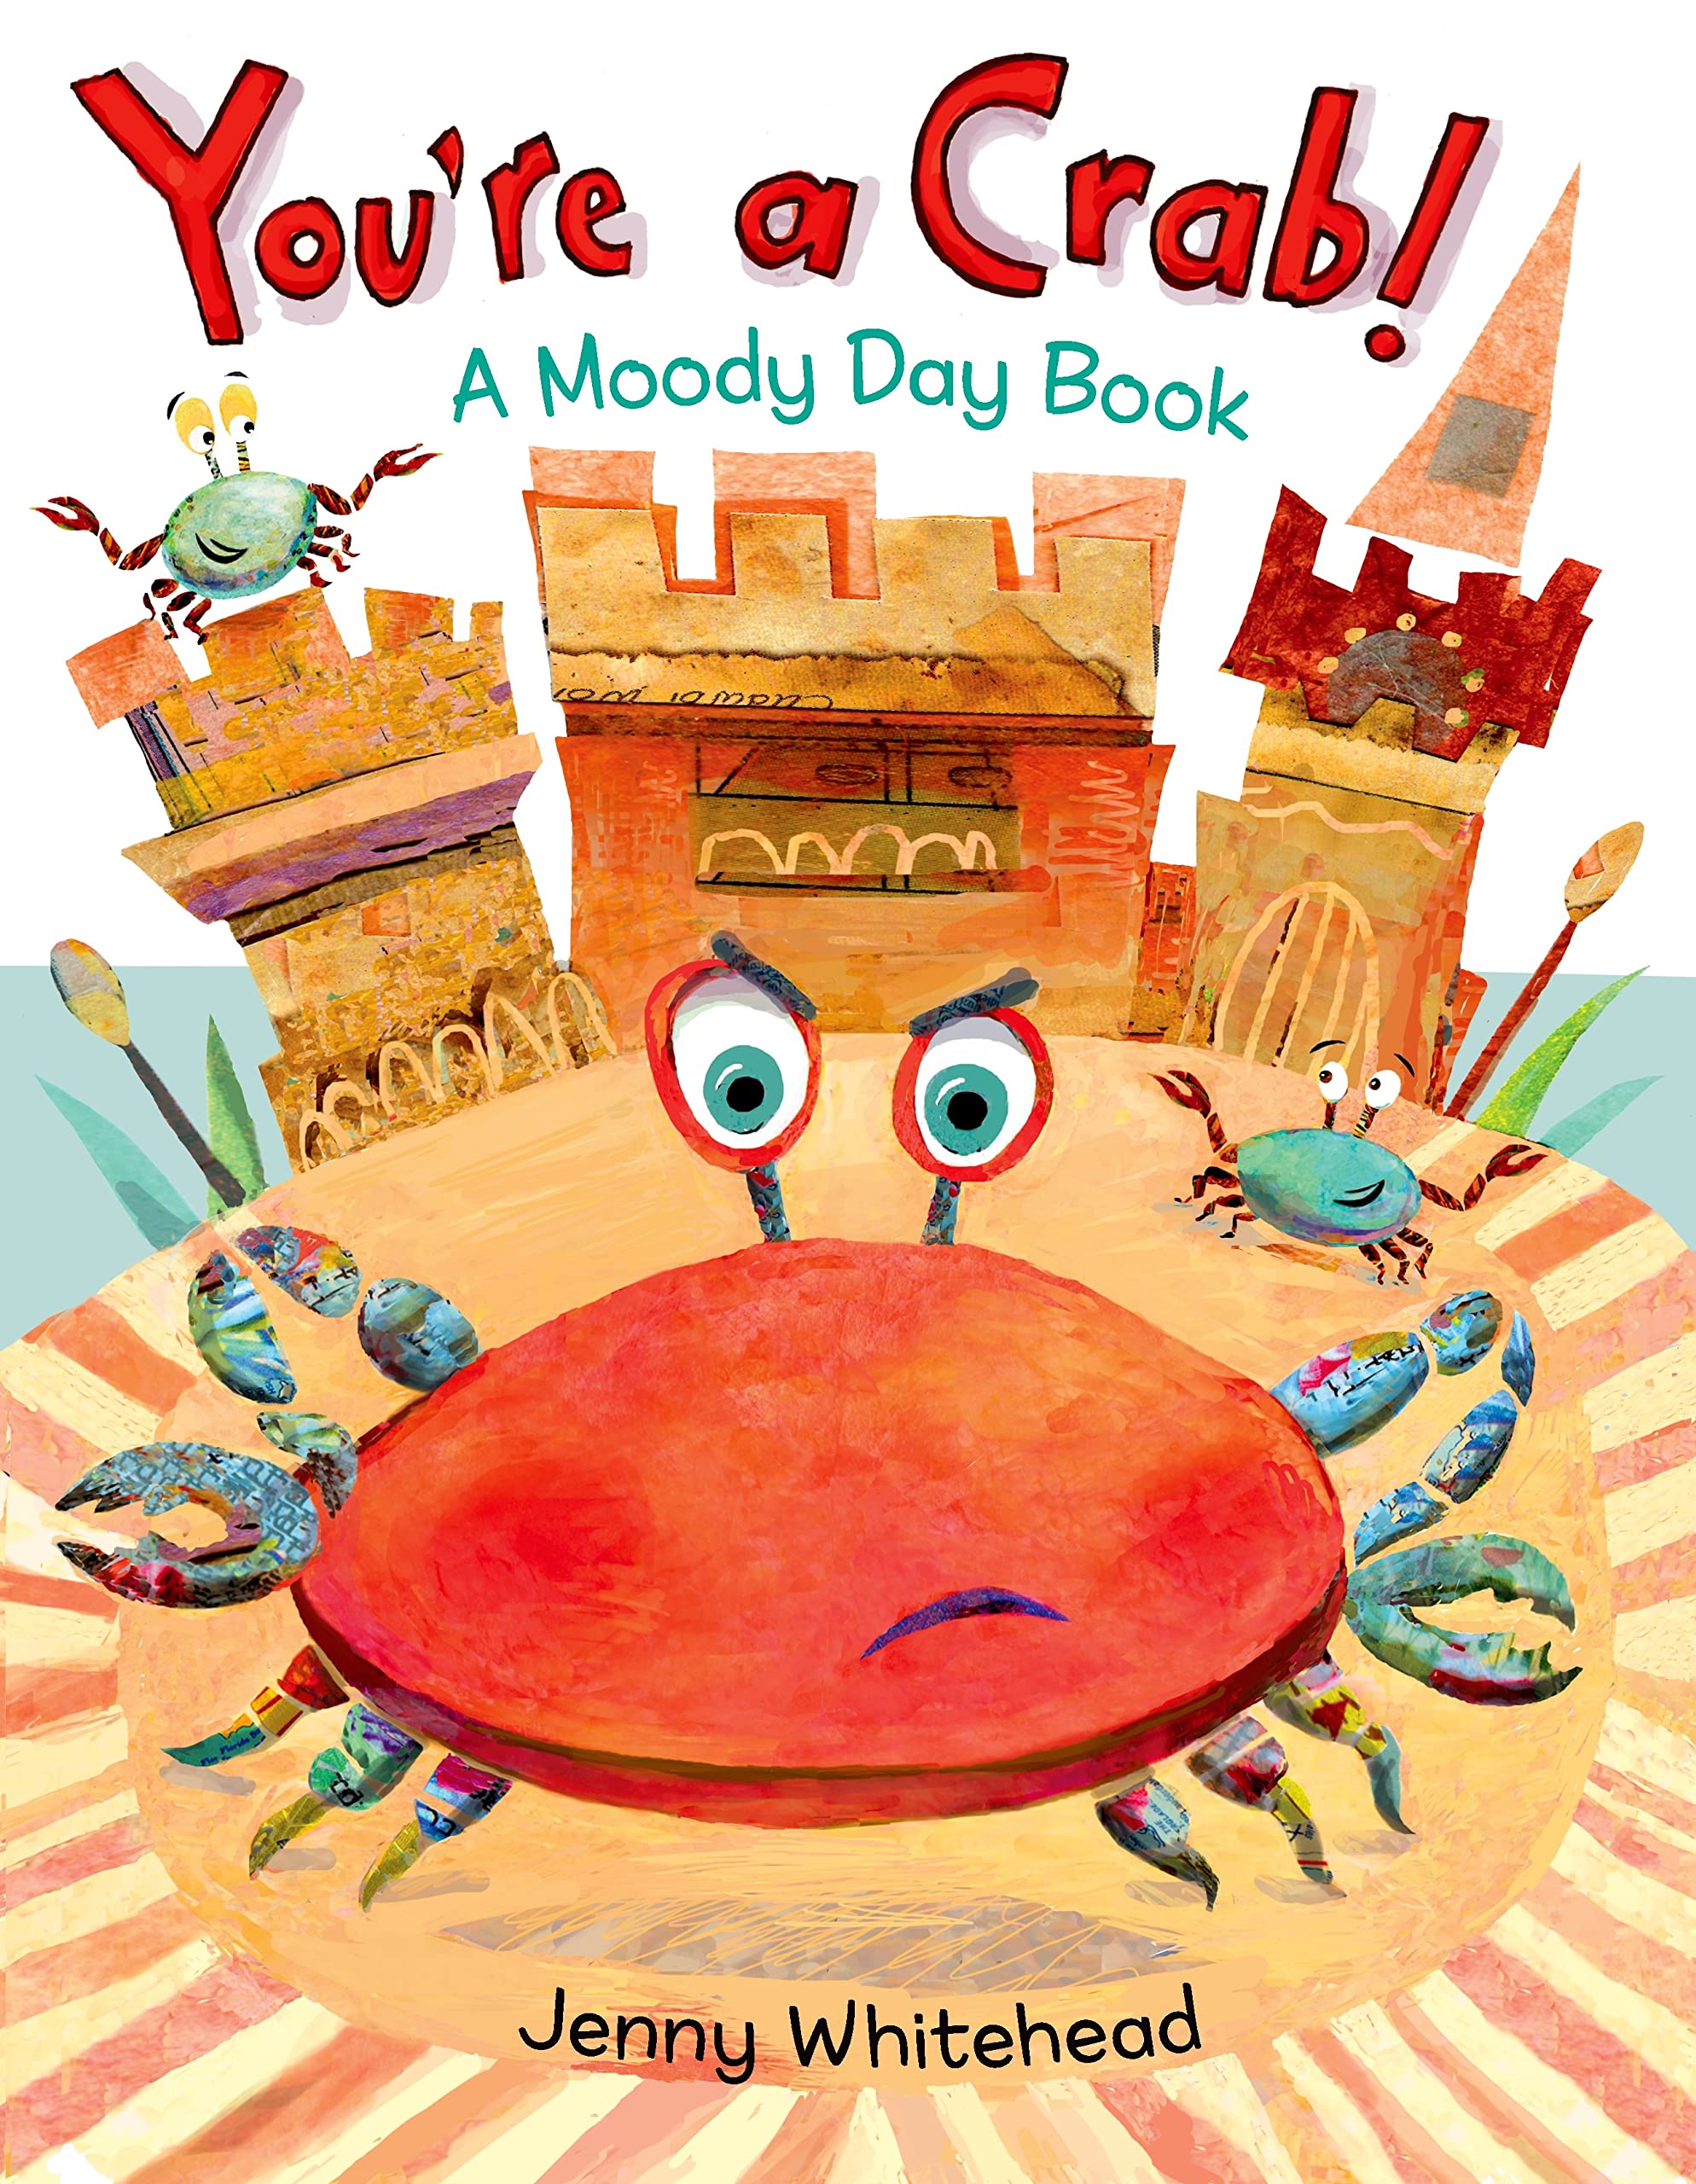 speech and language teaching concepts for You're a Crab!: A Moody Day Book in speech therapy